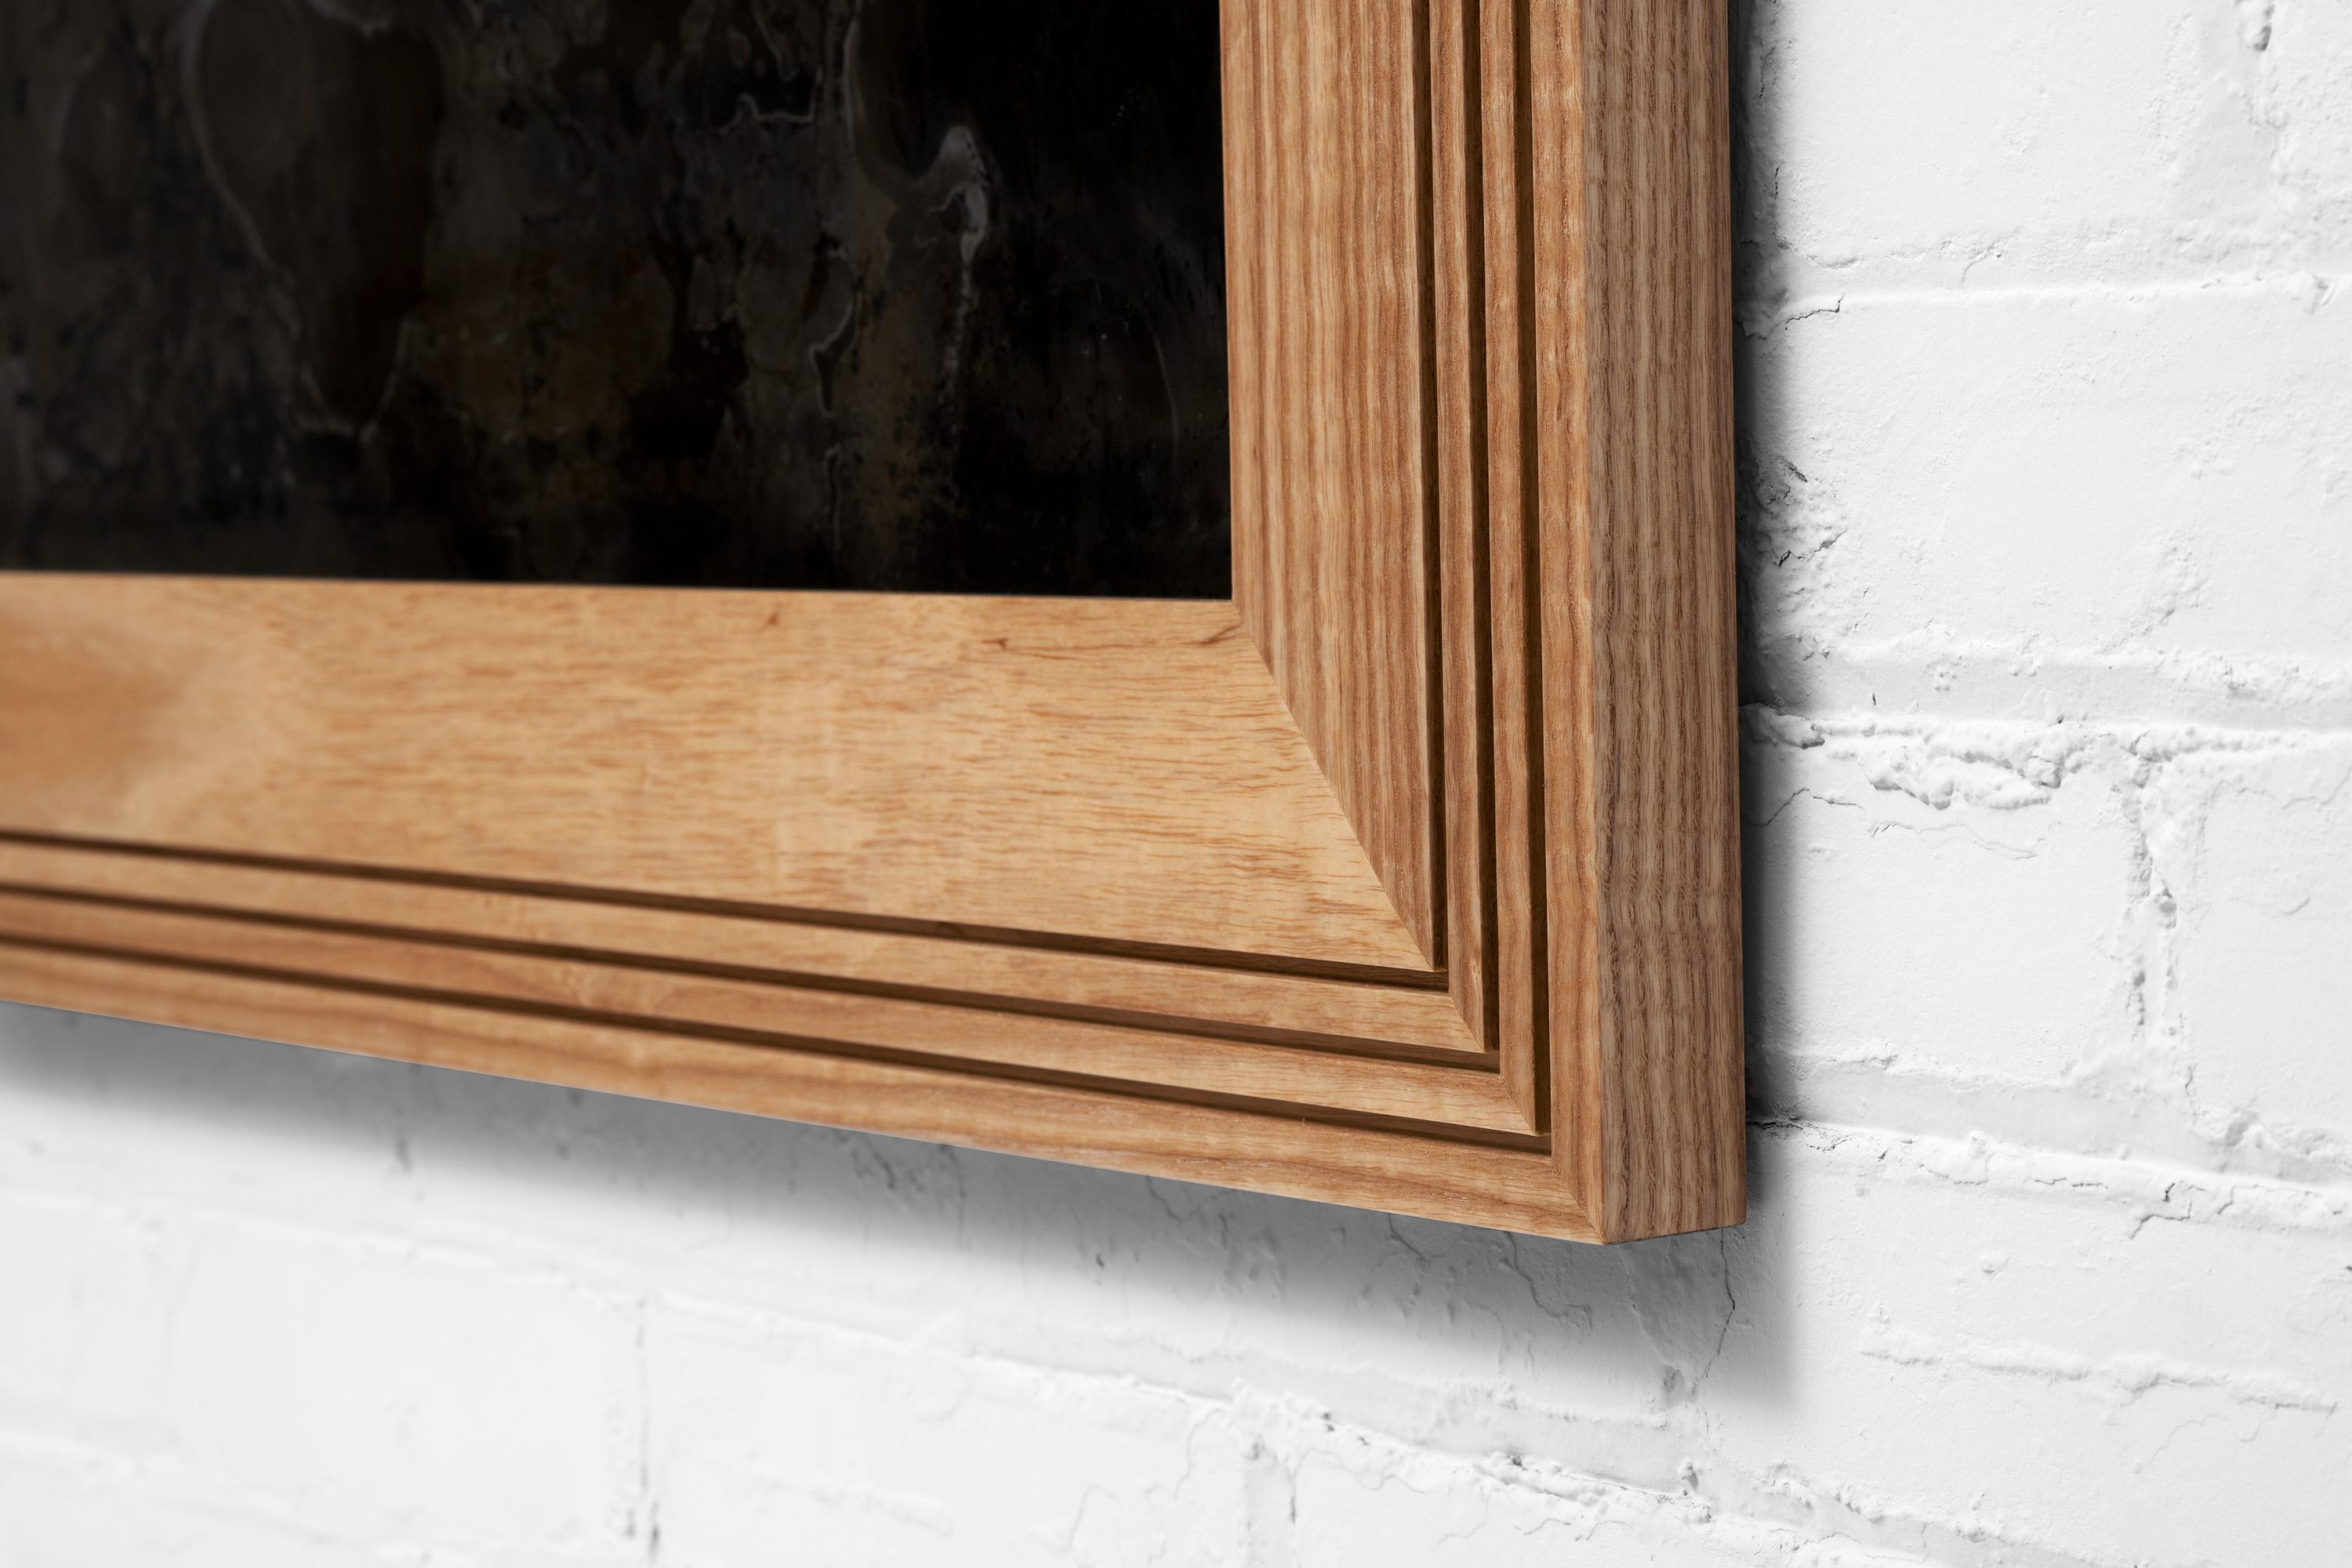 Bold and classic, this solid wood frame keeps the eye on the Scathain mirror. Notches celebrates simple geometry and classic lines, pulling inspiration from Art Deco patterns. 

All of our mirrors are custom-made to order and one of a kind. Our